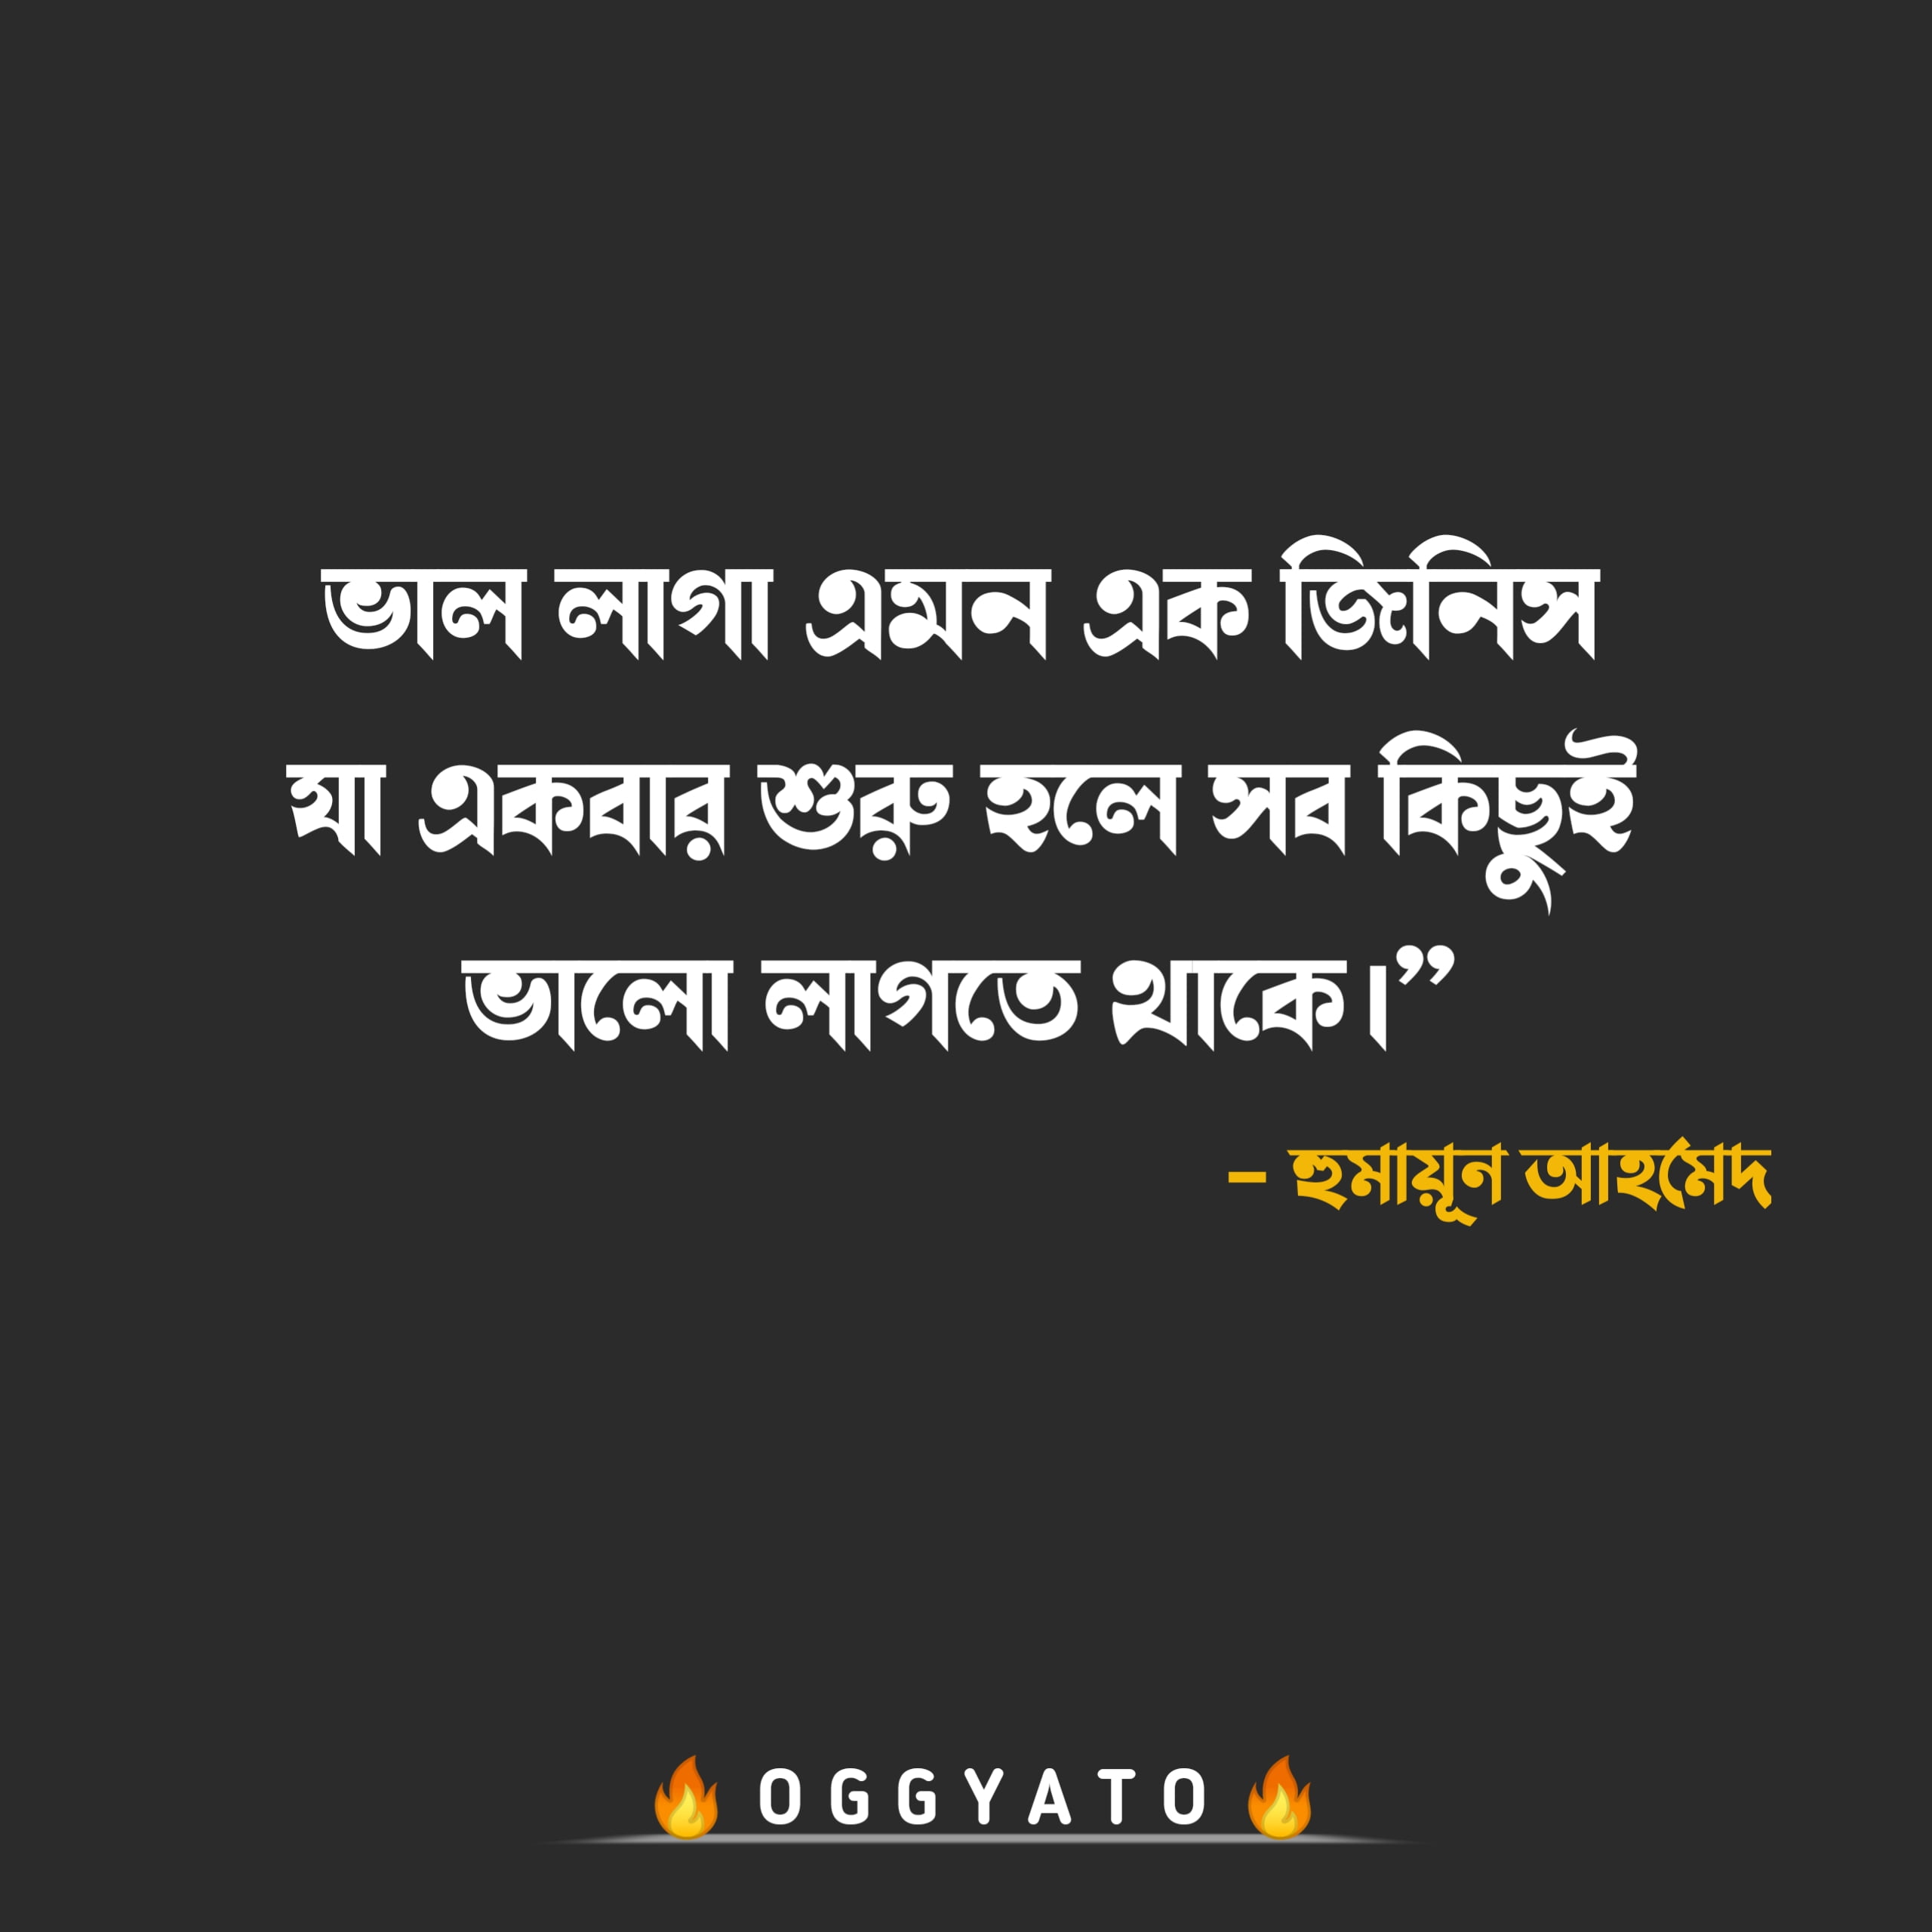 Bangla Love Quotes for Girlfriend 2